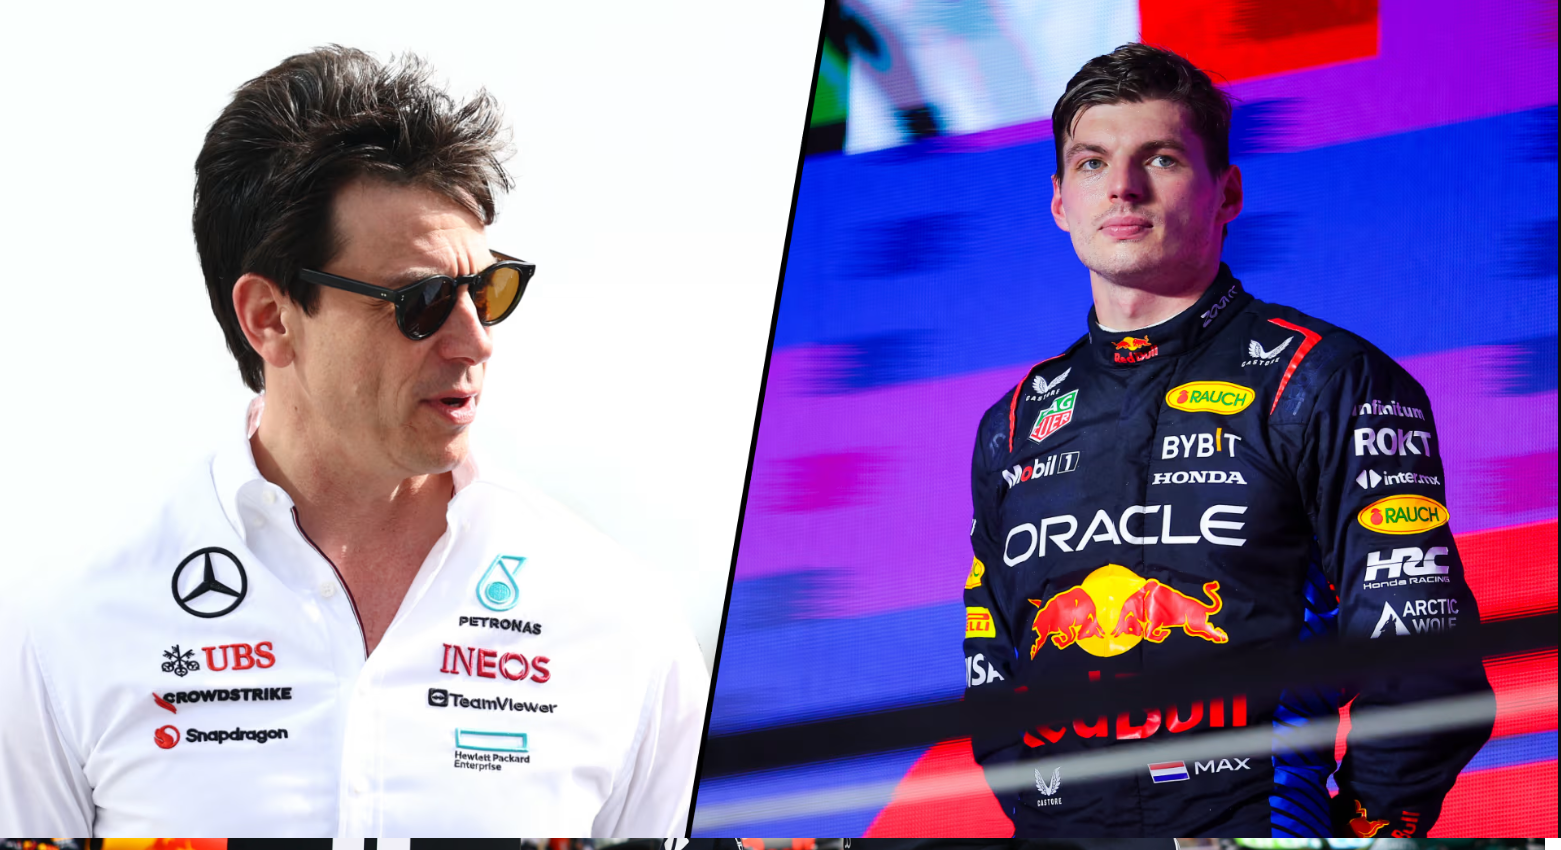 Toto Wolff adds more fuel to Verstappen to Mercedes rumors 38